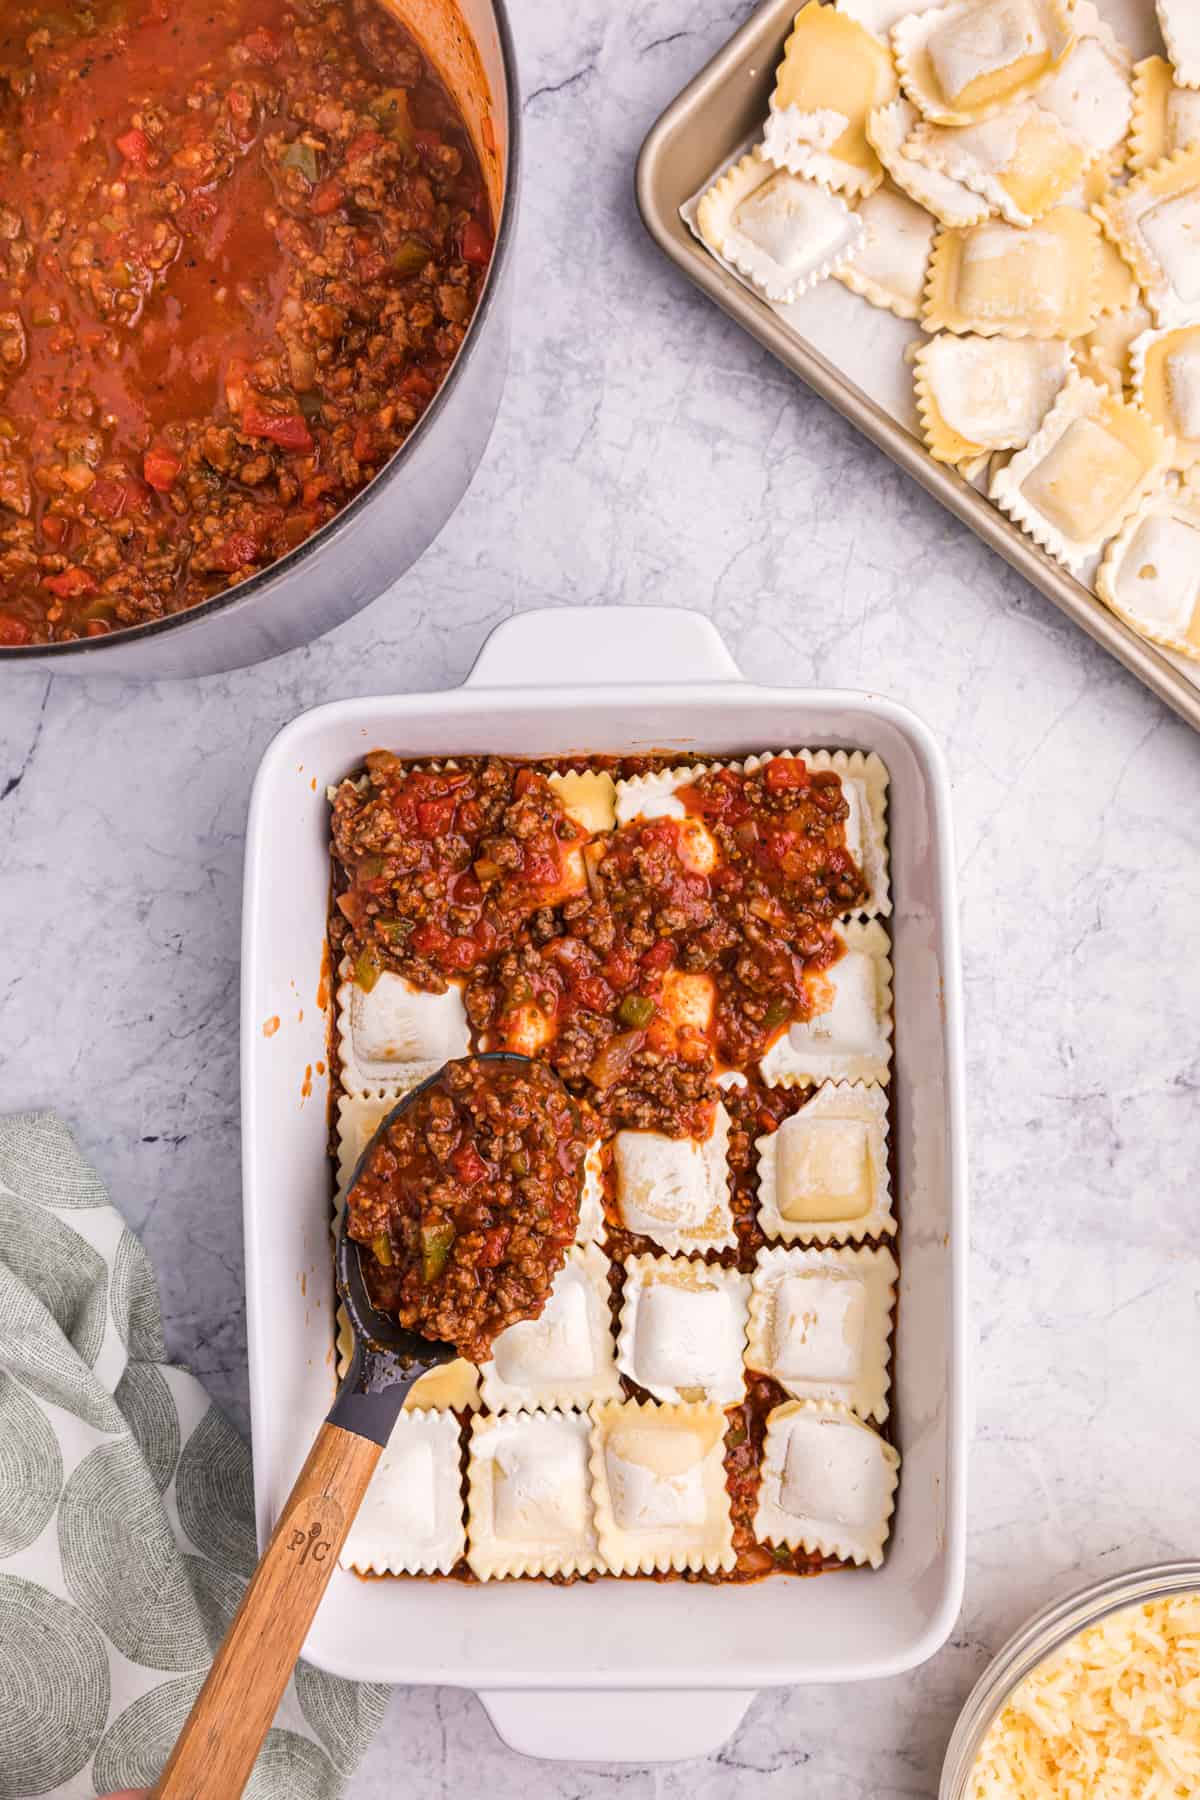 Meat sauce is being spread over a layer of raviolis in a white baking dish.